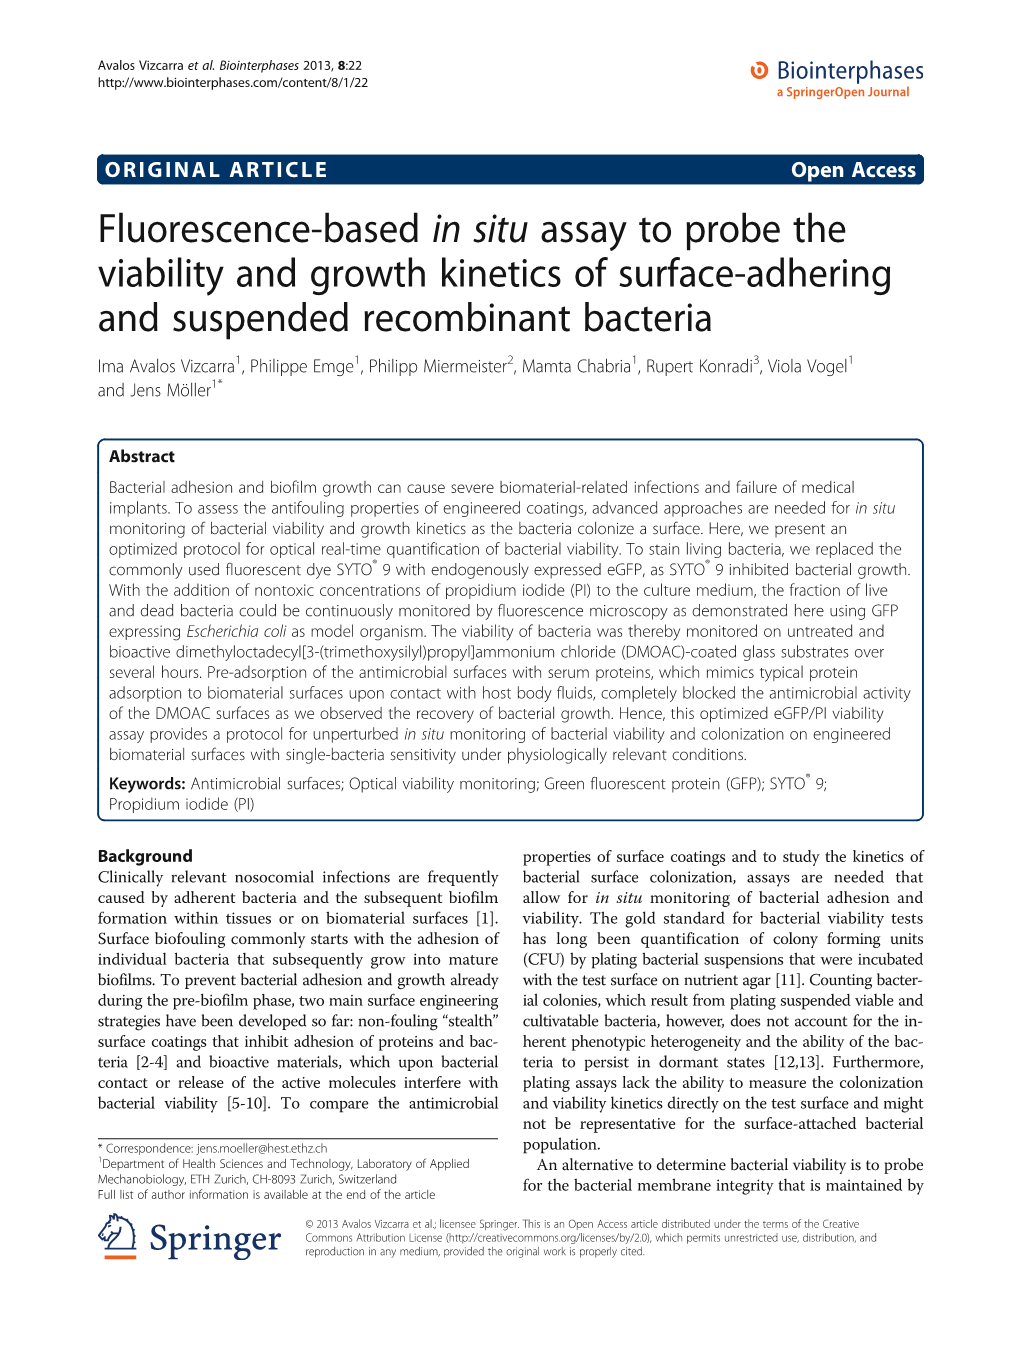 Fluorescence-Based in Situ Assay to Probe the Viability and Growth